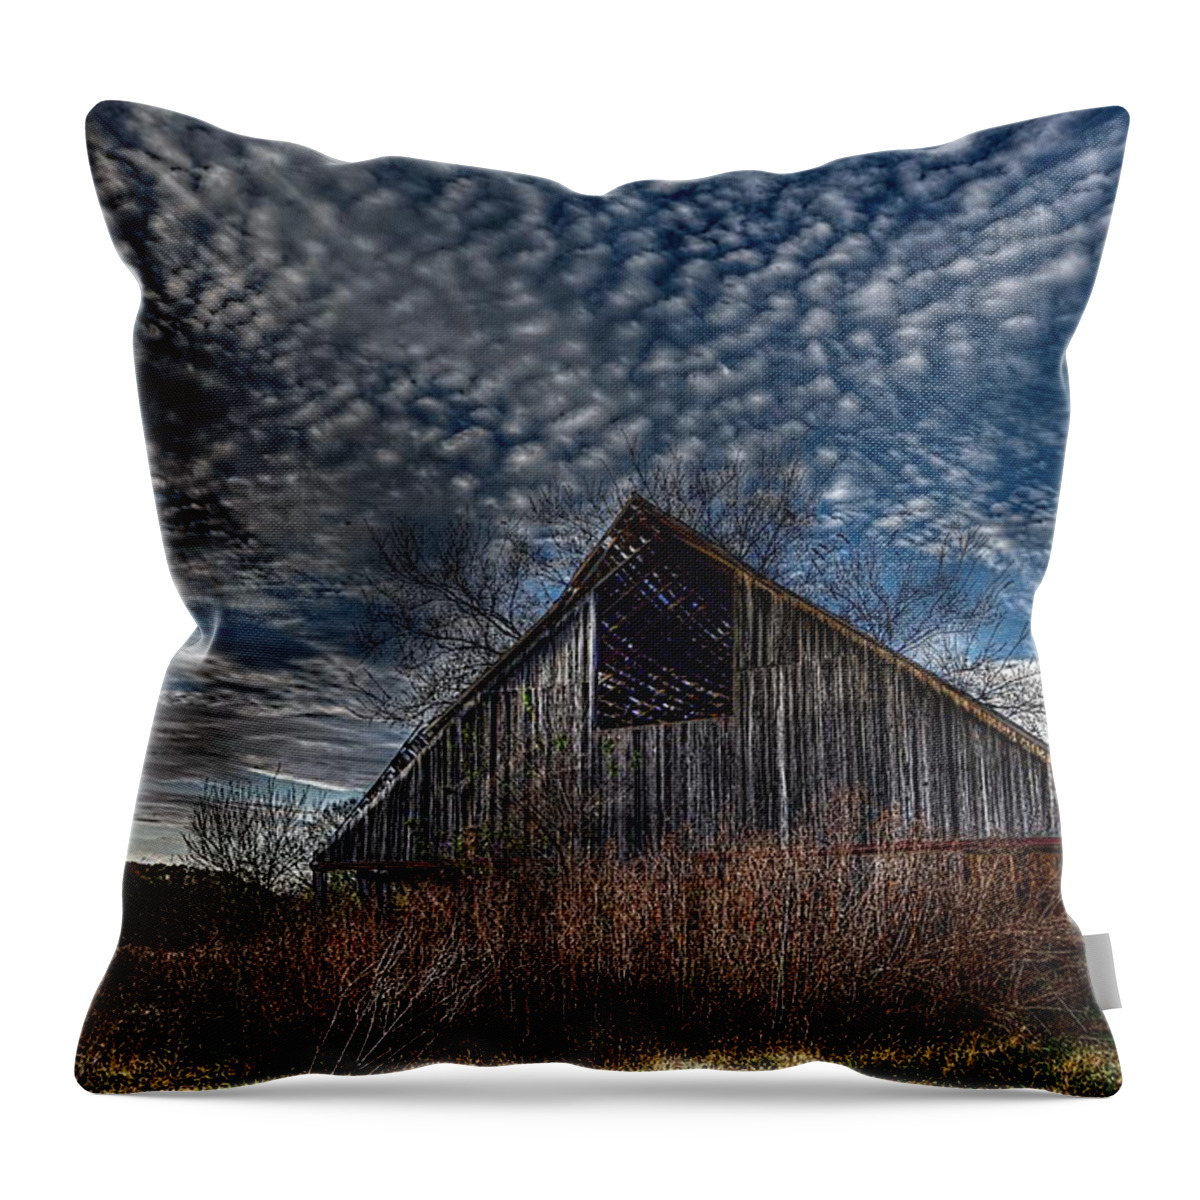 Clouds Throw Pillow featuring the photograph A Soap-suds Sky by Karen McKenzie McAdoo